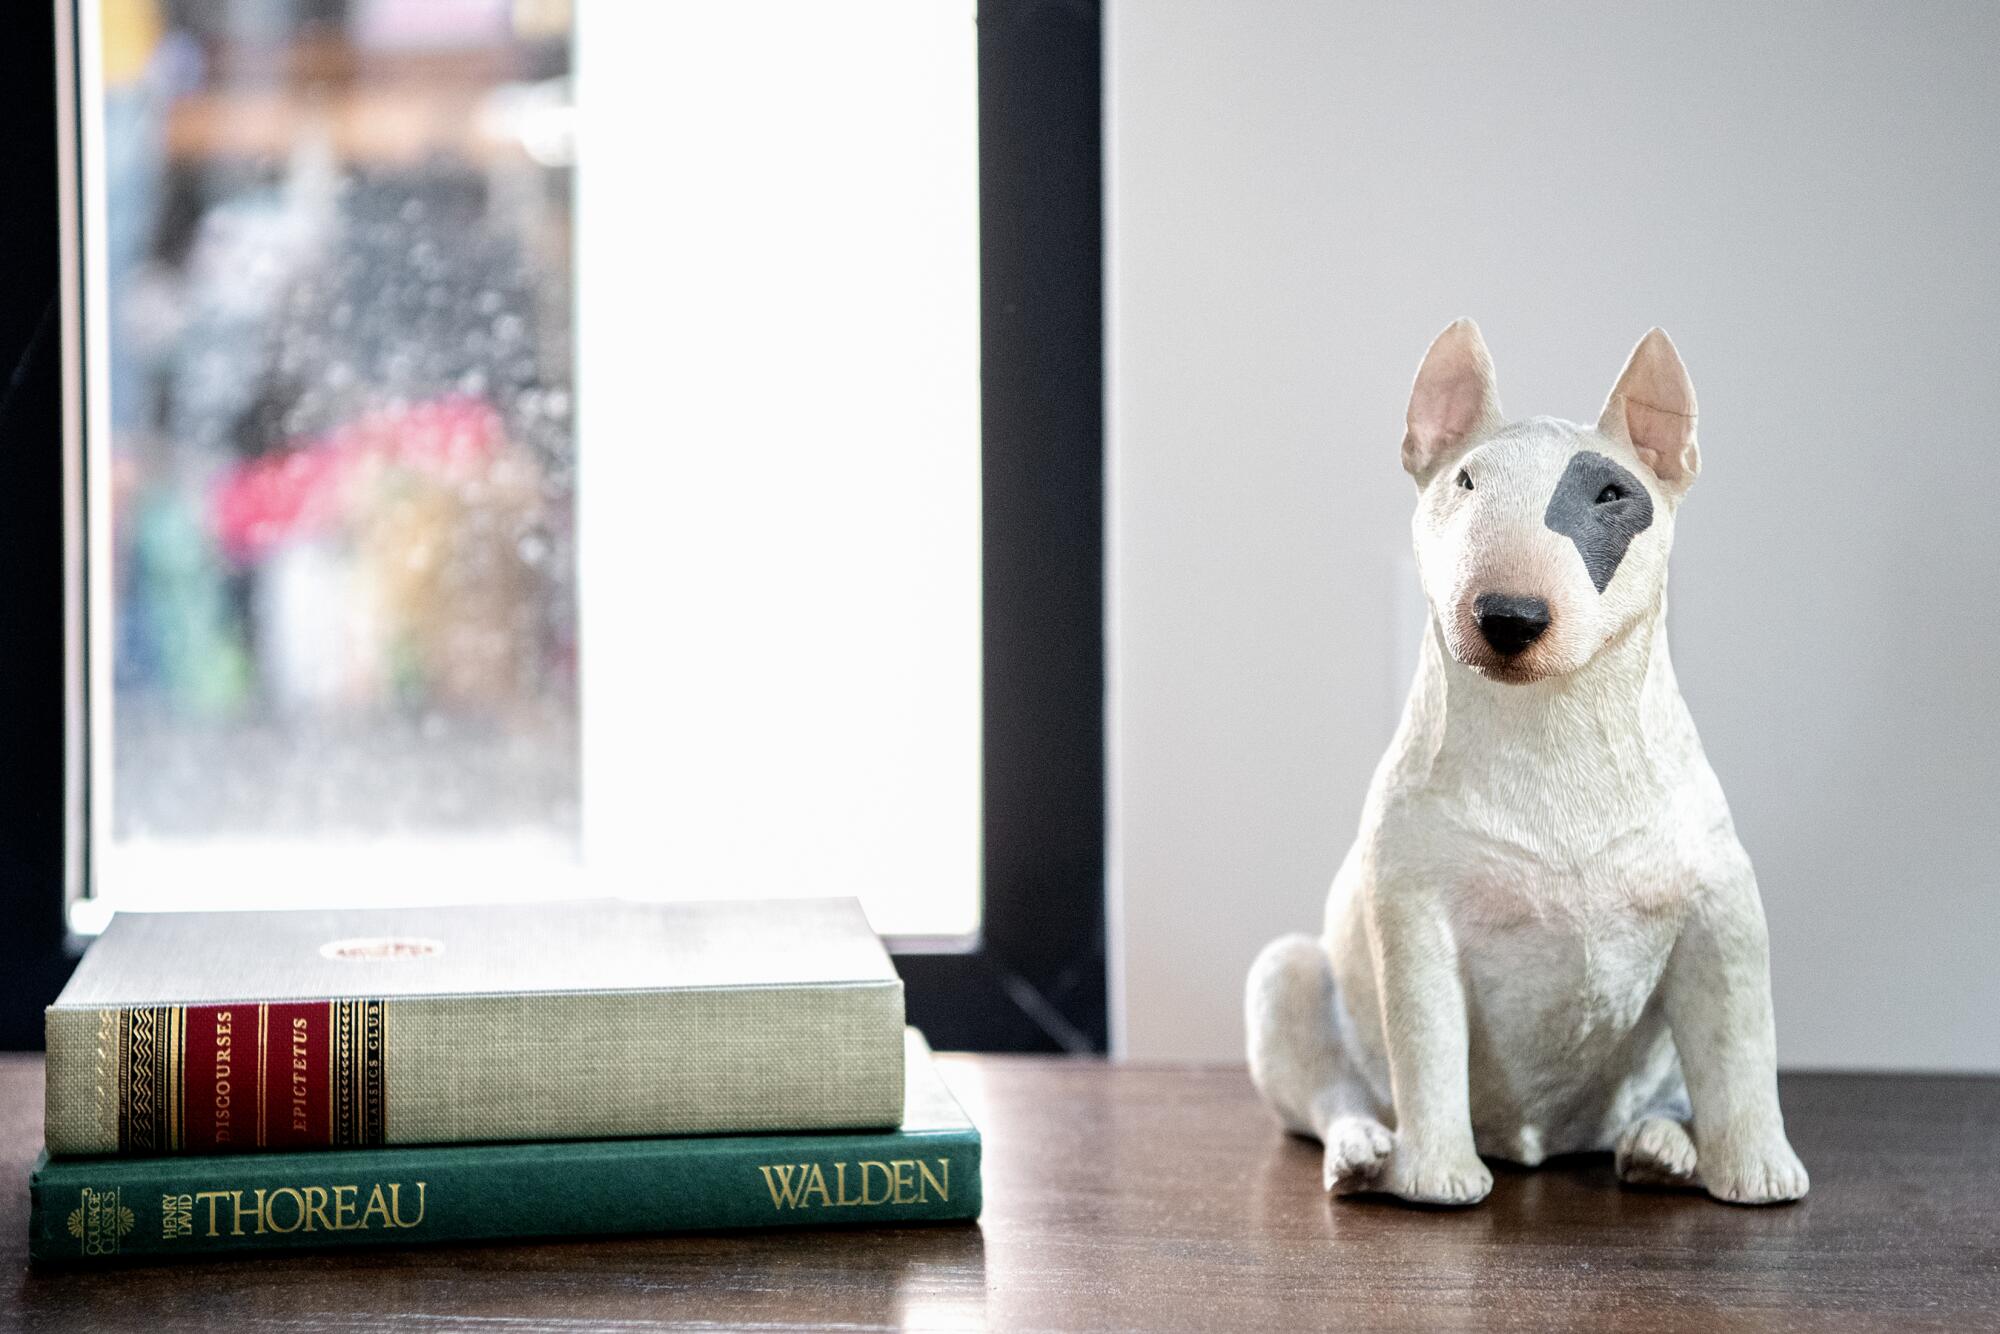 Two books and a statue of a dog sit on a wooden surface indoors.